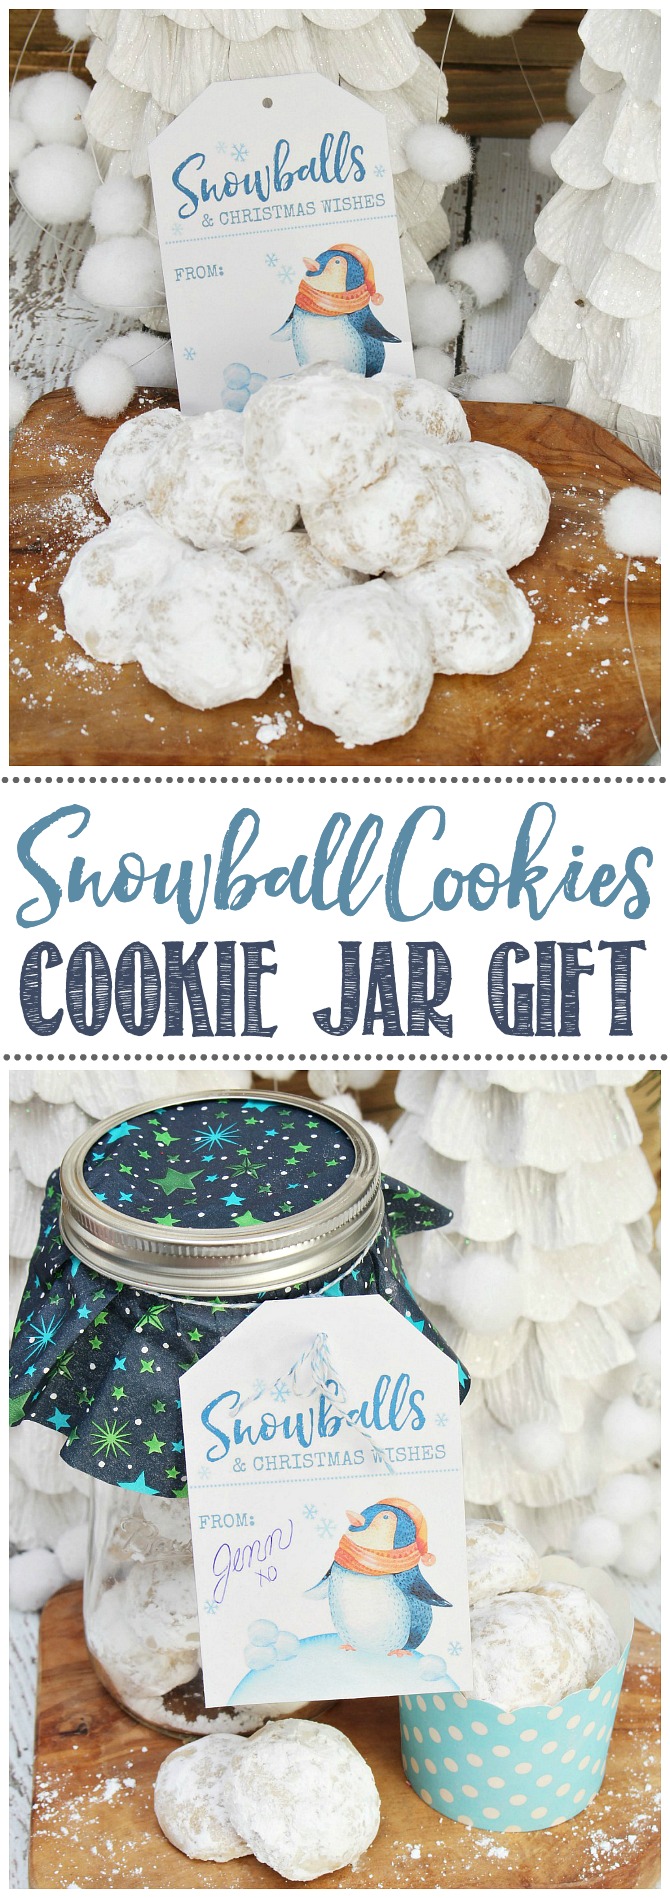 Snowball cookies on a tray and wrapped up in a mason jar gift.